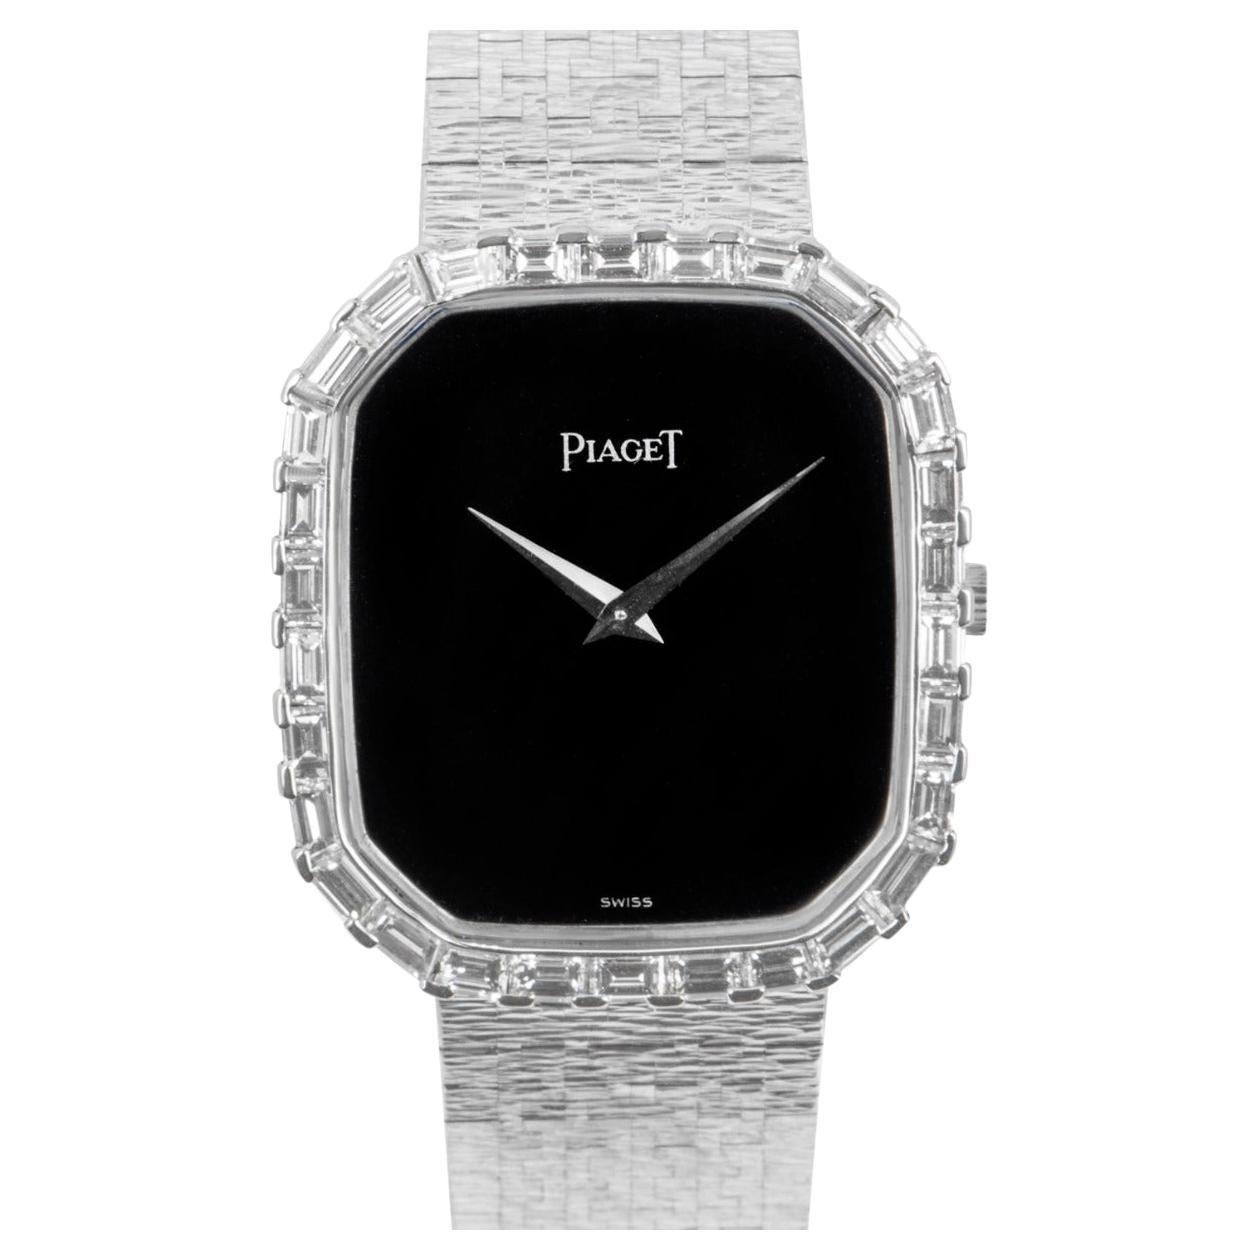 An 18k white gold Octagonal Case men's wristwatch, by Piaget.

This vintage wristwatch features a black onyx dial, which is complemented with a fixed octagonal bezel, set with 30 baguette cut diamonds.

Further features include an 18k white gold